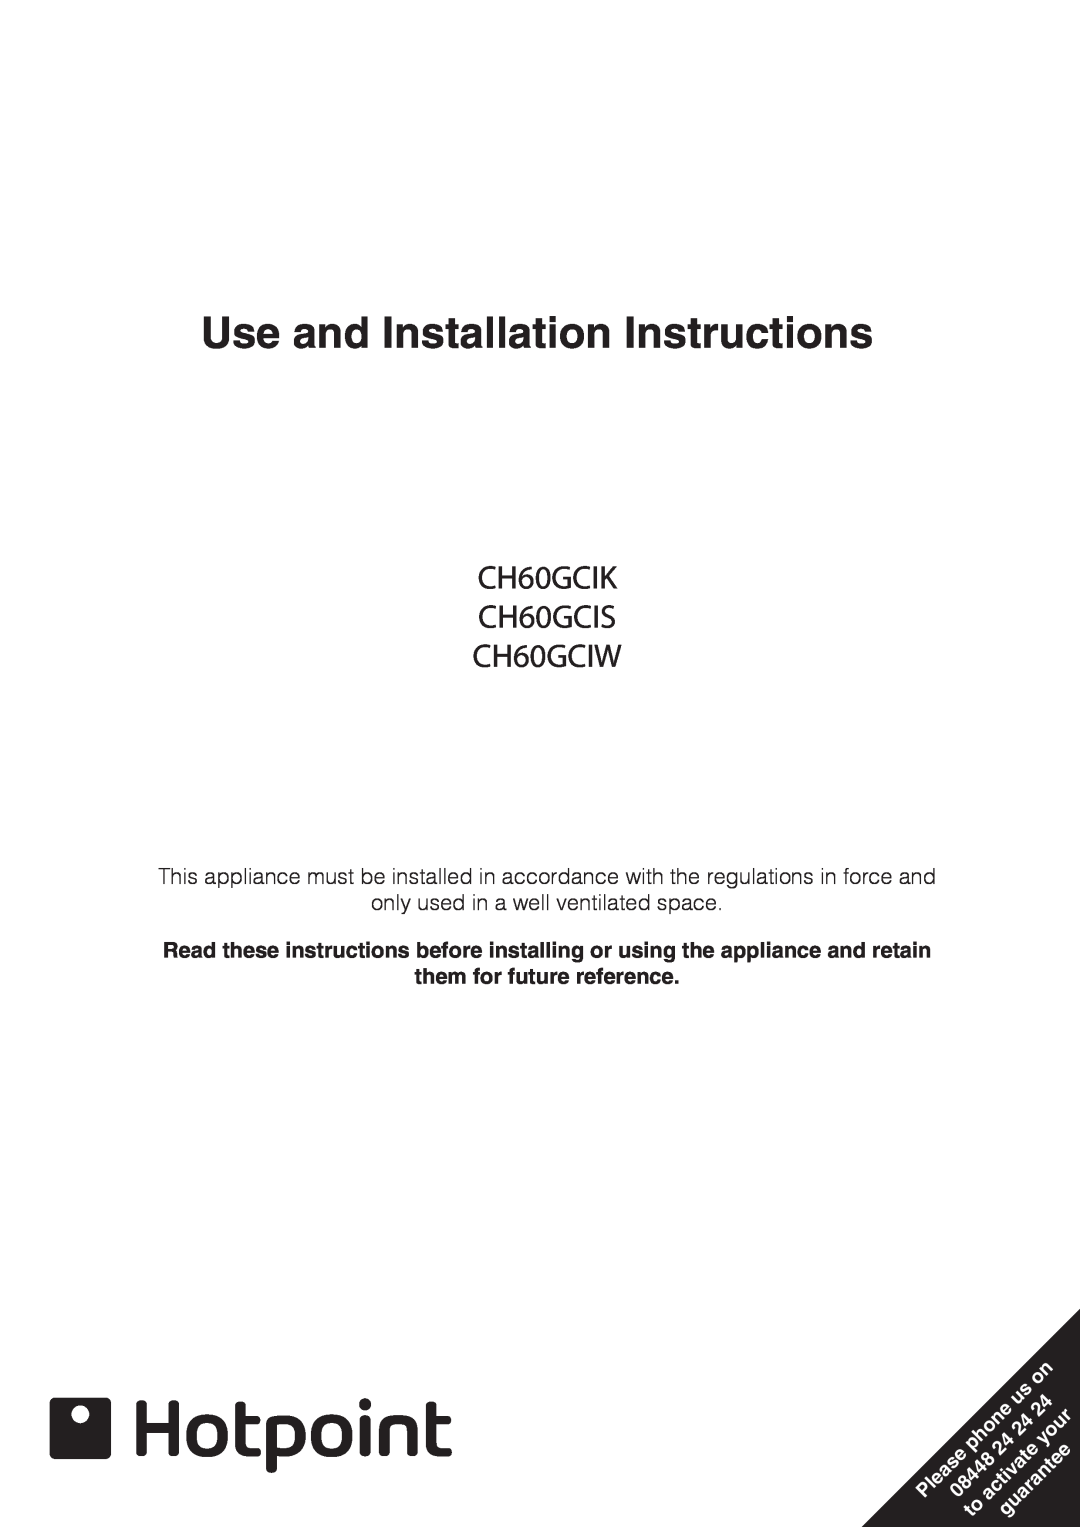 Hotpoint CH60GCIK installation instructions Use and Installation Instructions, them for future reference, phone, your 